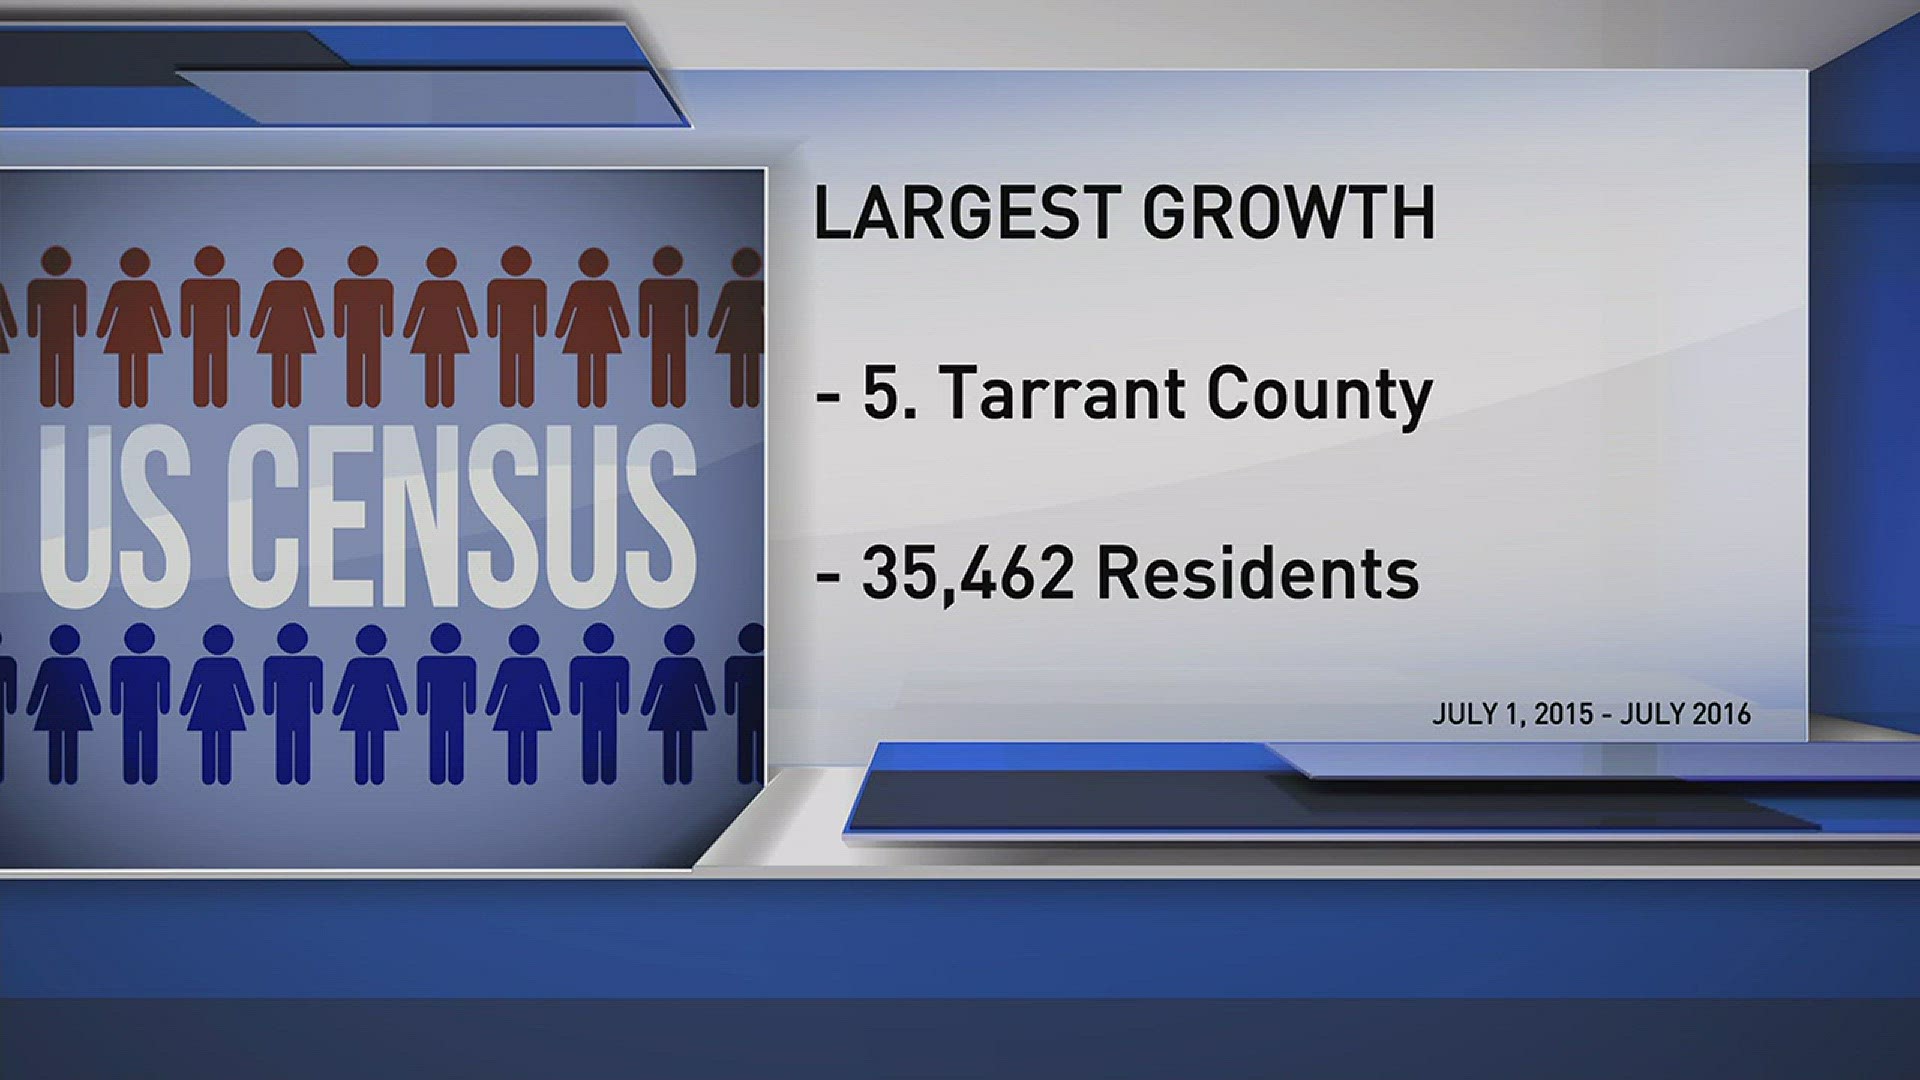 Census Tarrant County saw 5th largest growth in nation